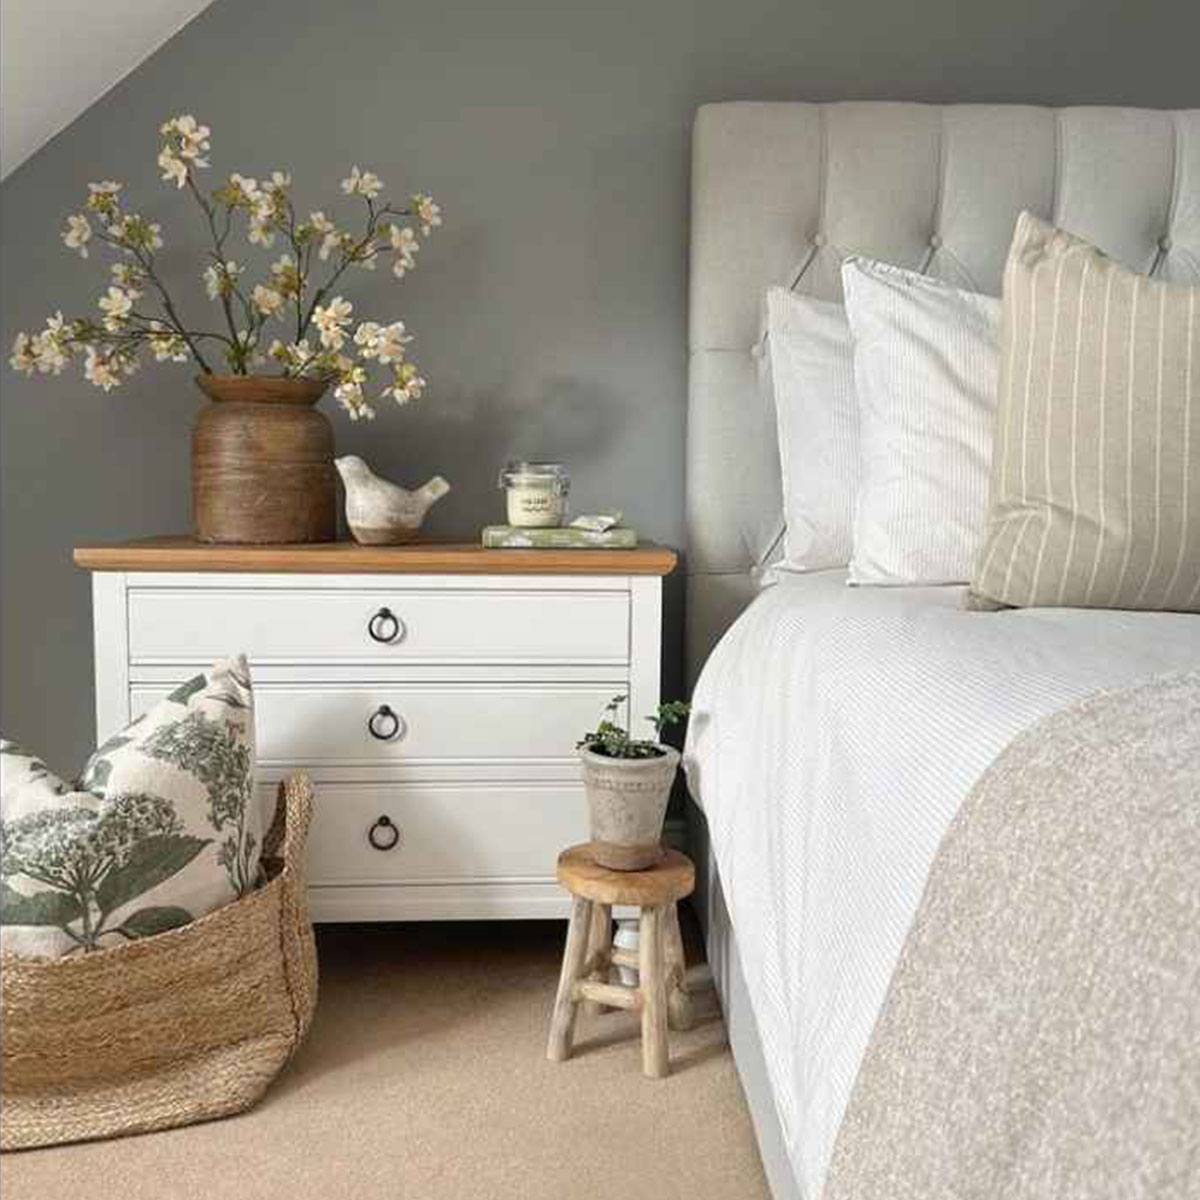 How to Find the Perfect Nightstand Height